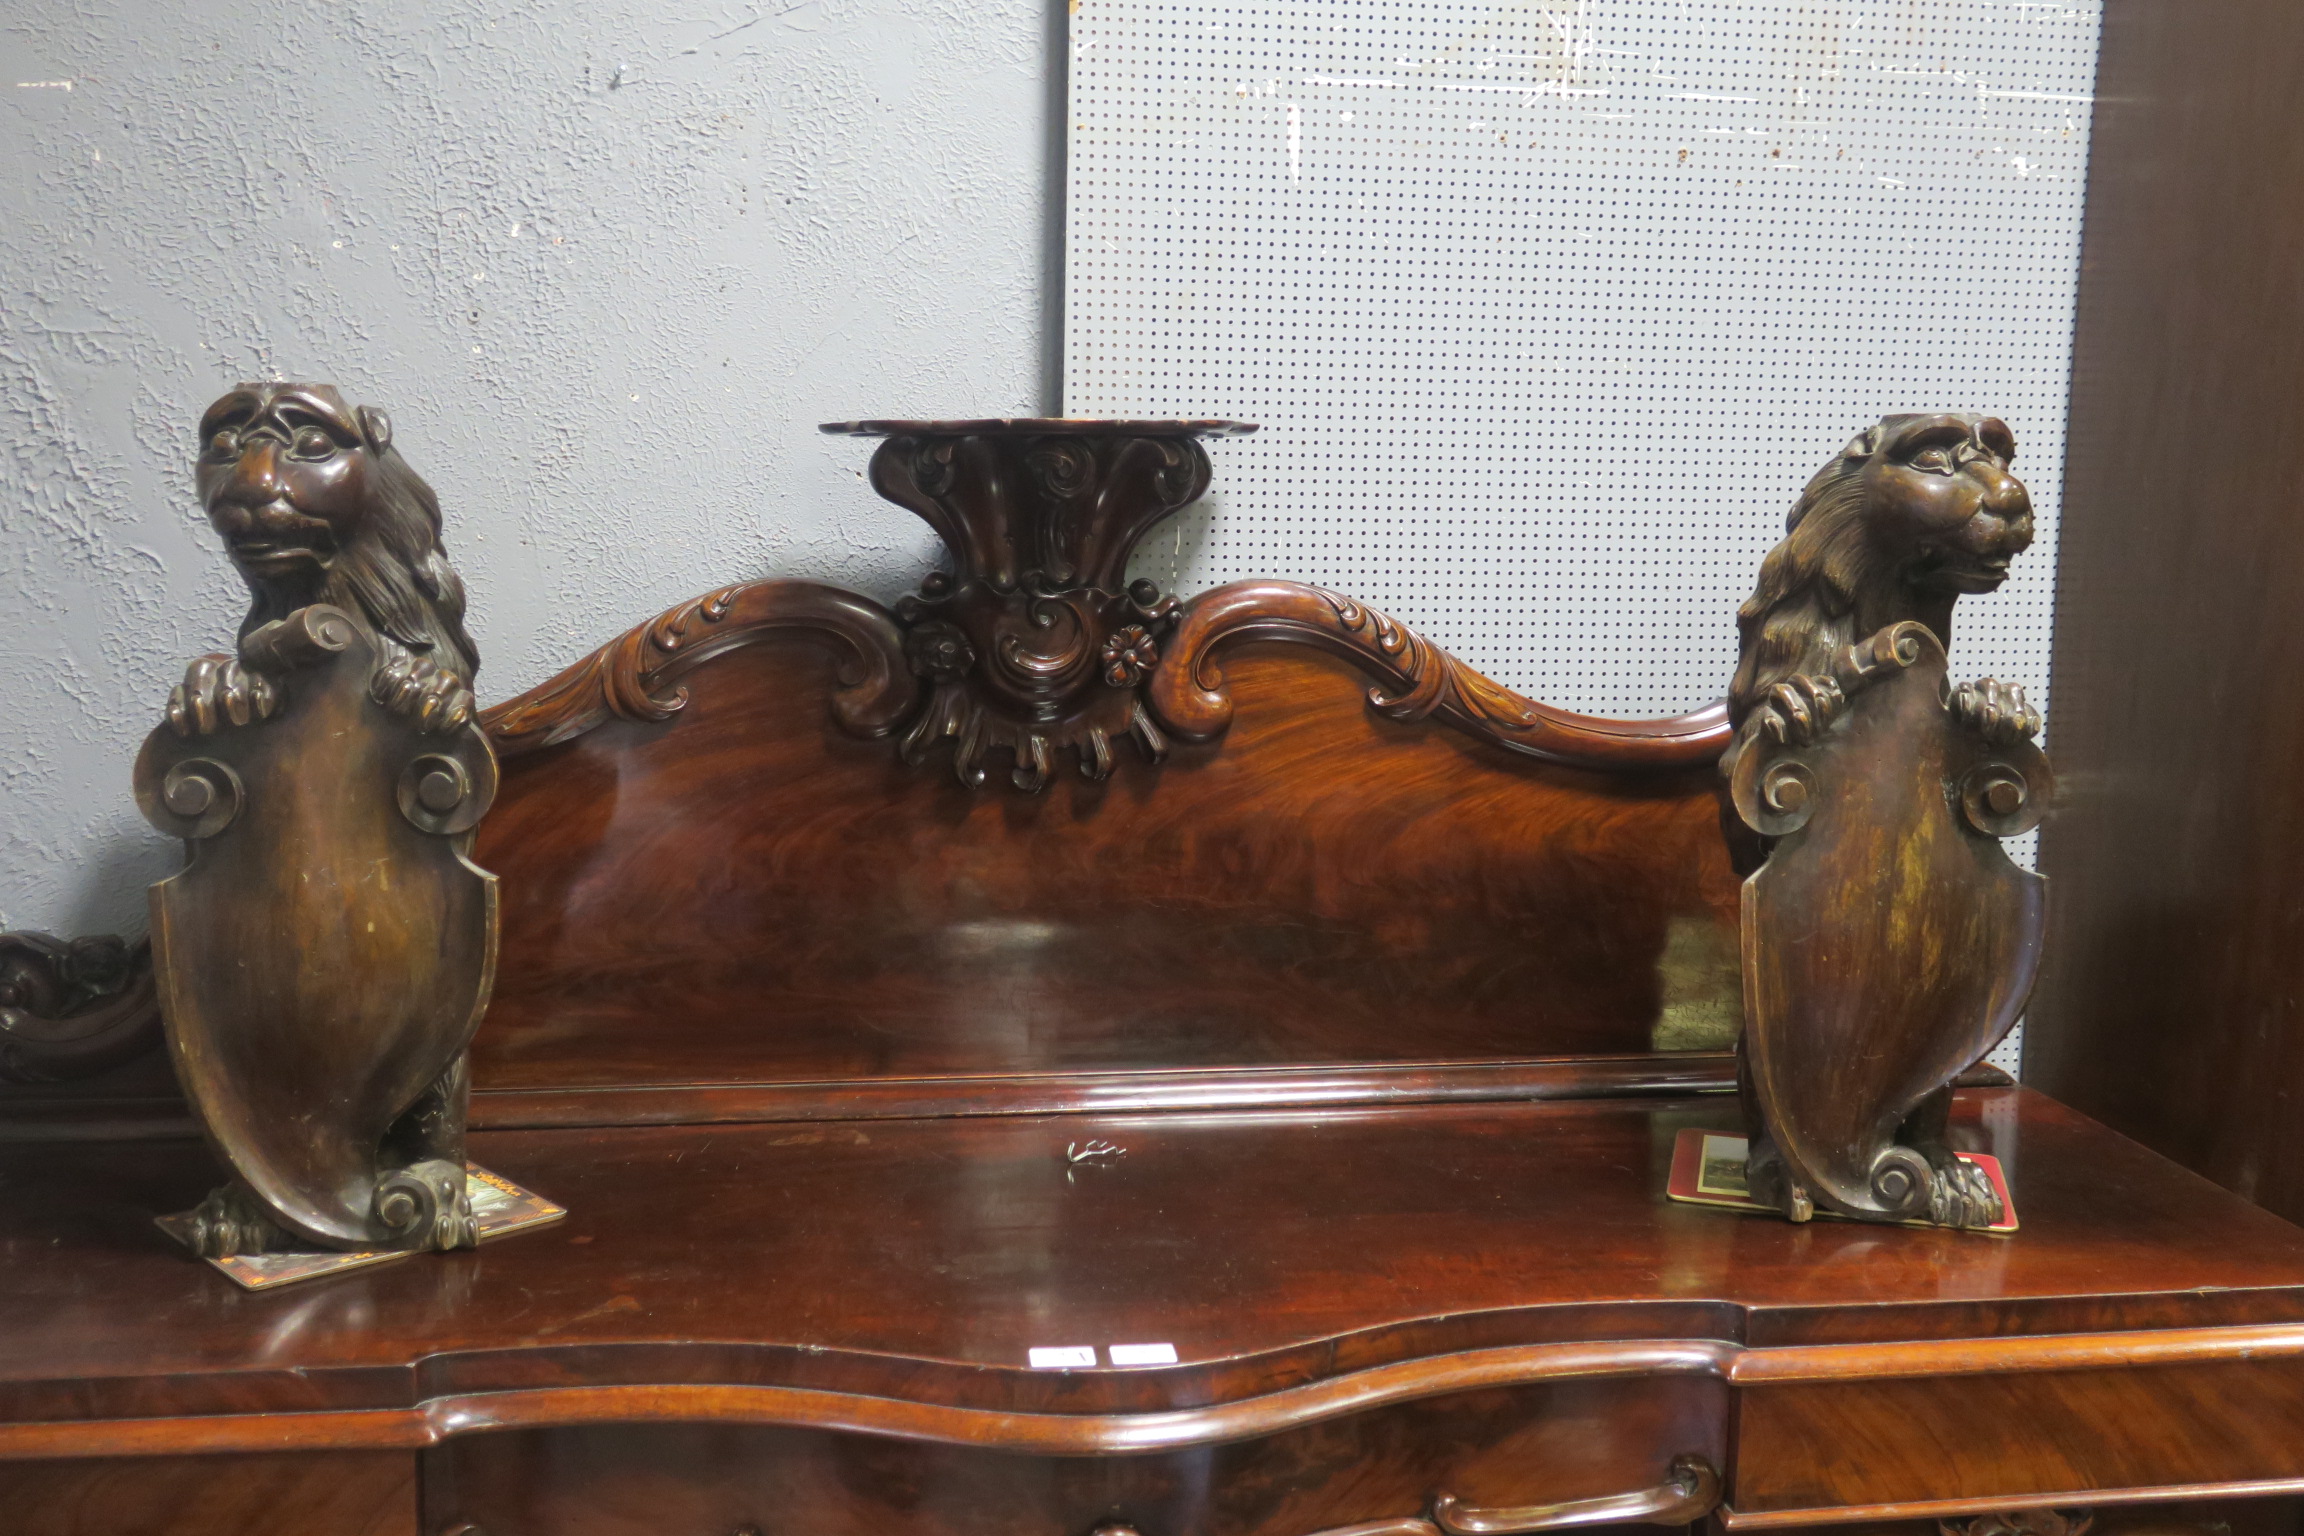 A FINE PAIR OF 19TH CENTURY CARVED WOOD LIONS each fully maned beast shown standing on hind legs